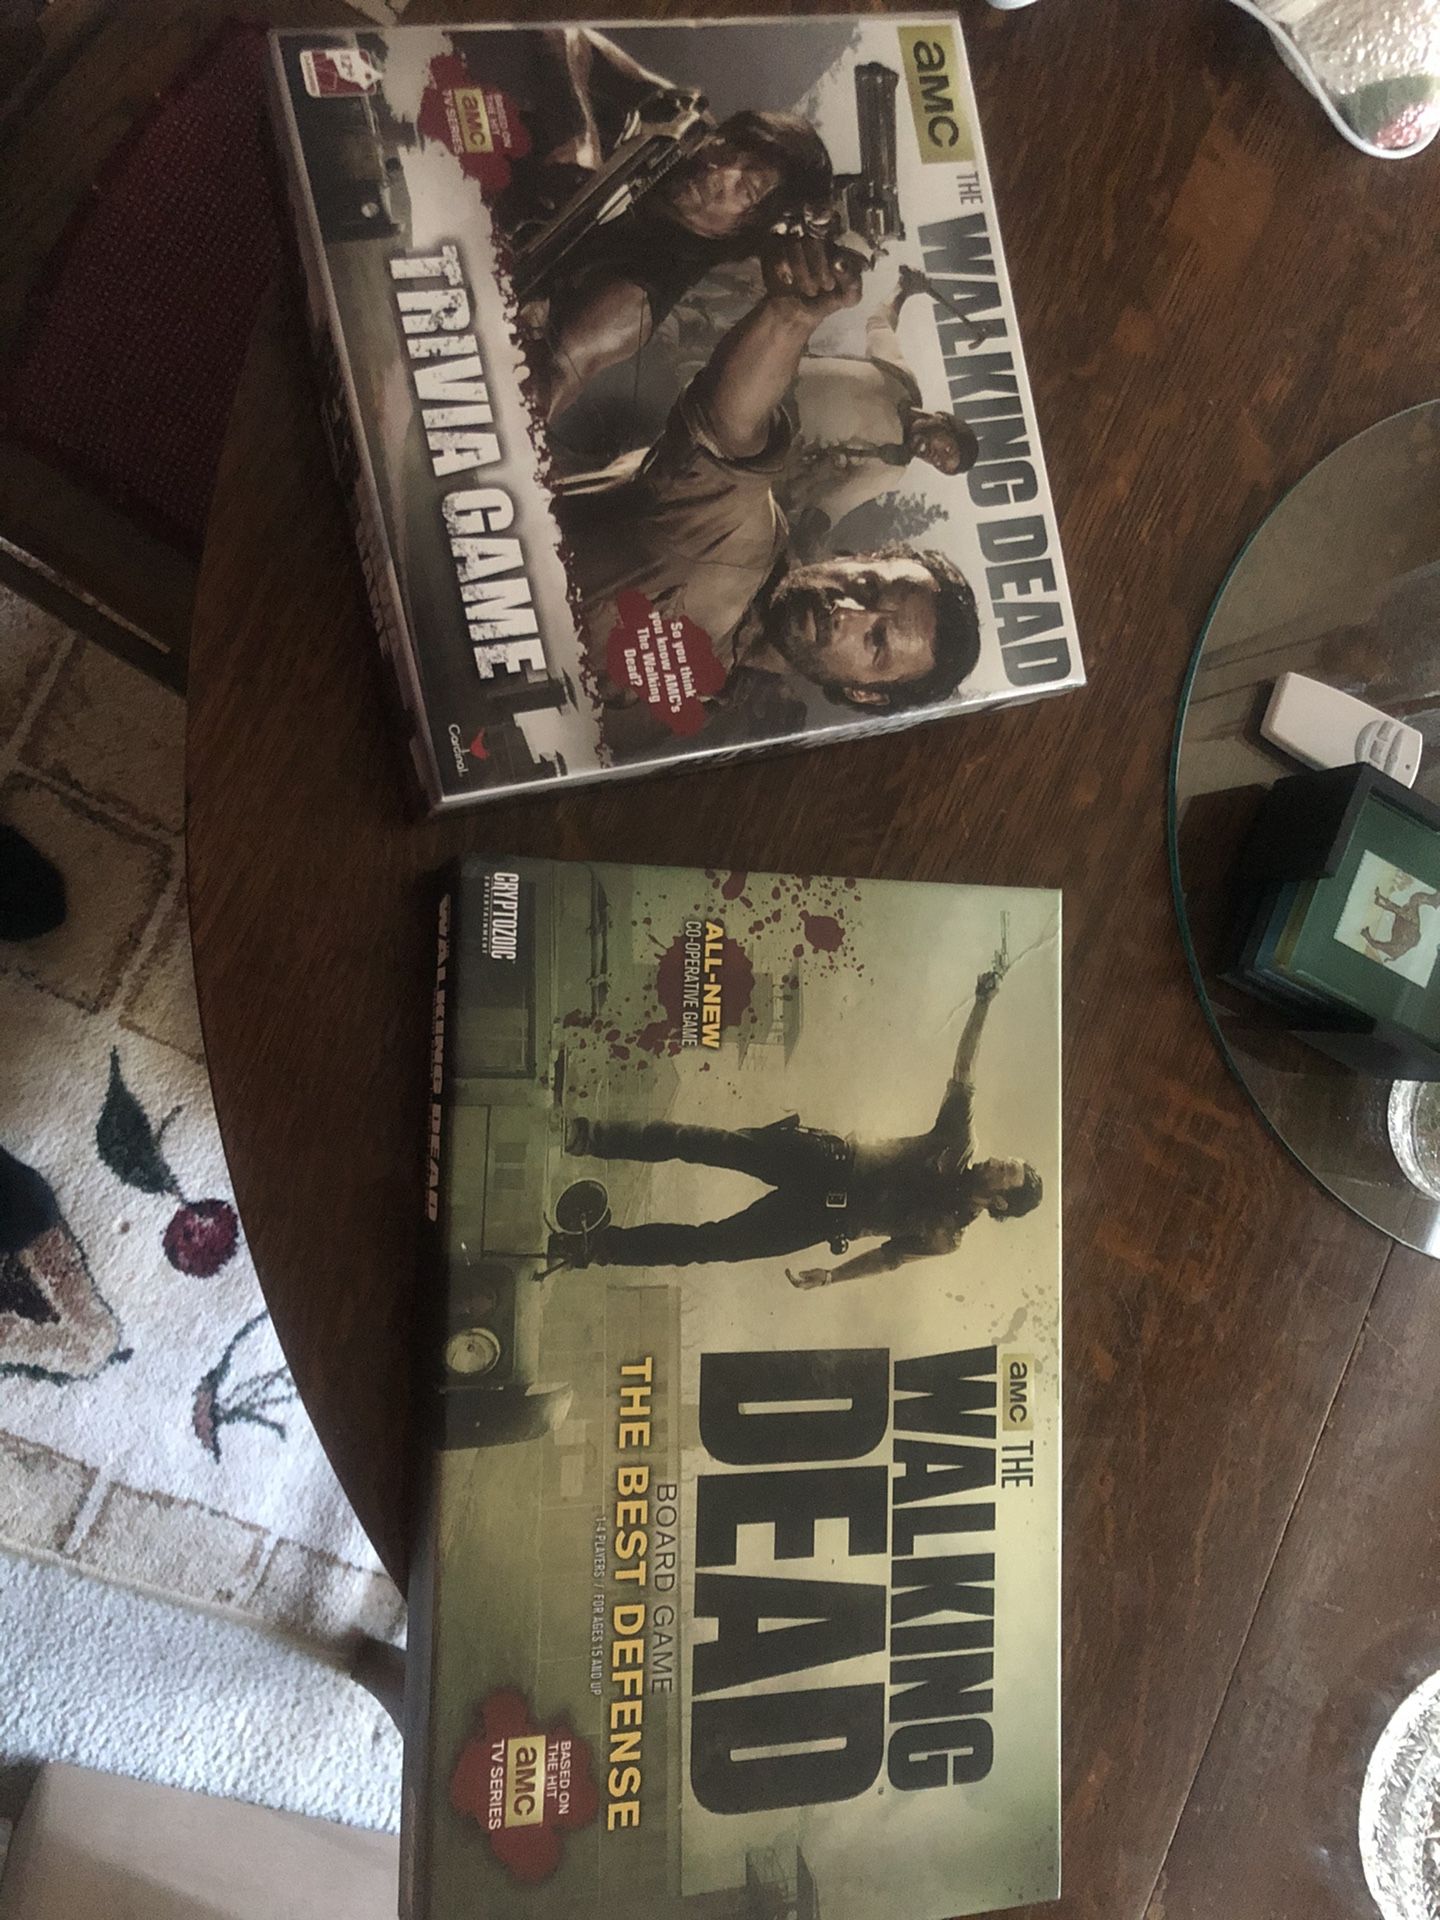 Walking Dead Trivia Game and Walking Dead Board Game